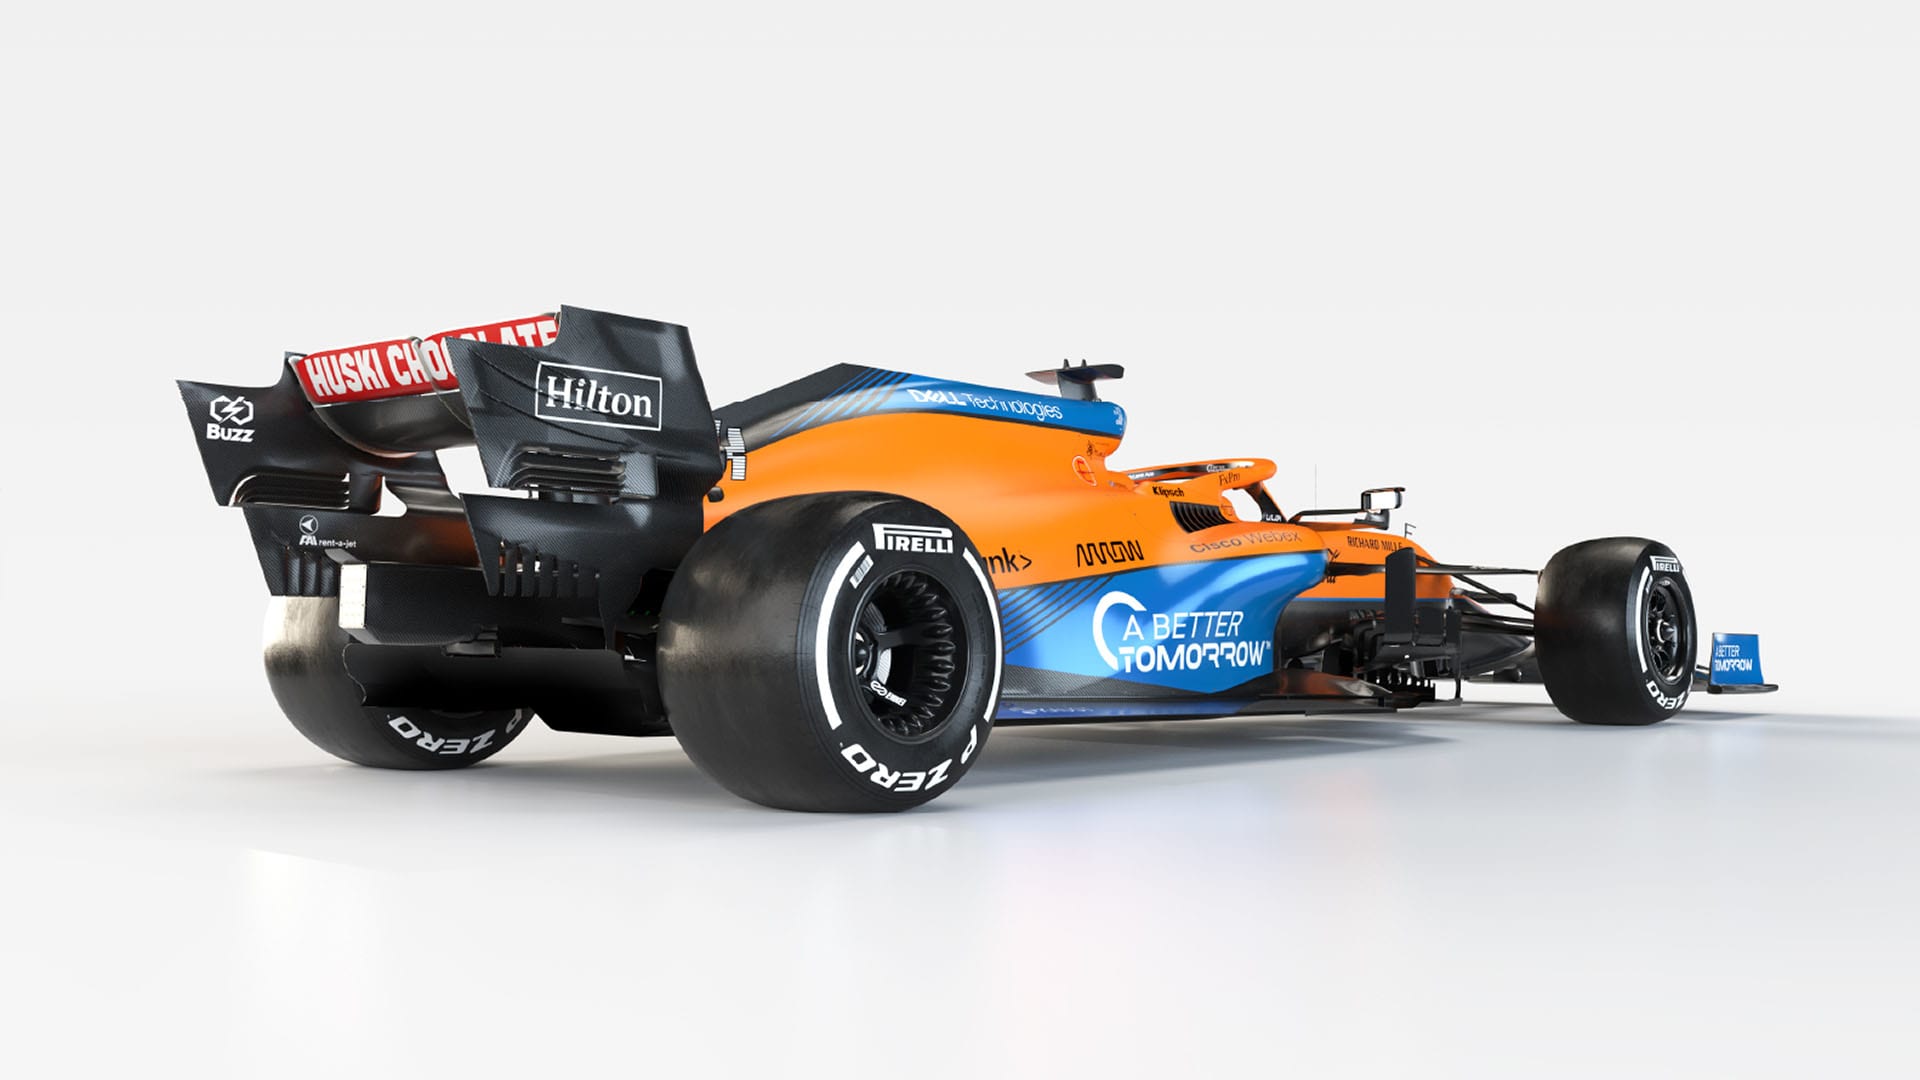 Mclaren 21 F1 Car Launch Mclaren Unveil Mercedes Engined Mcl35m To Be Piloted By Ricciardo And Norris In 21